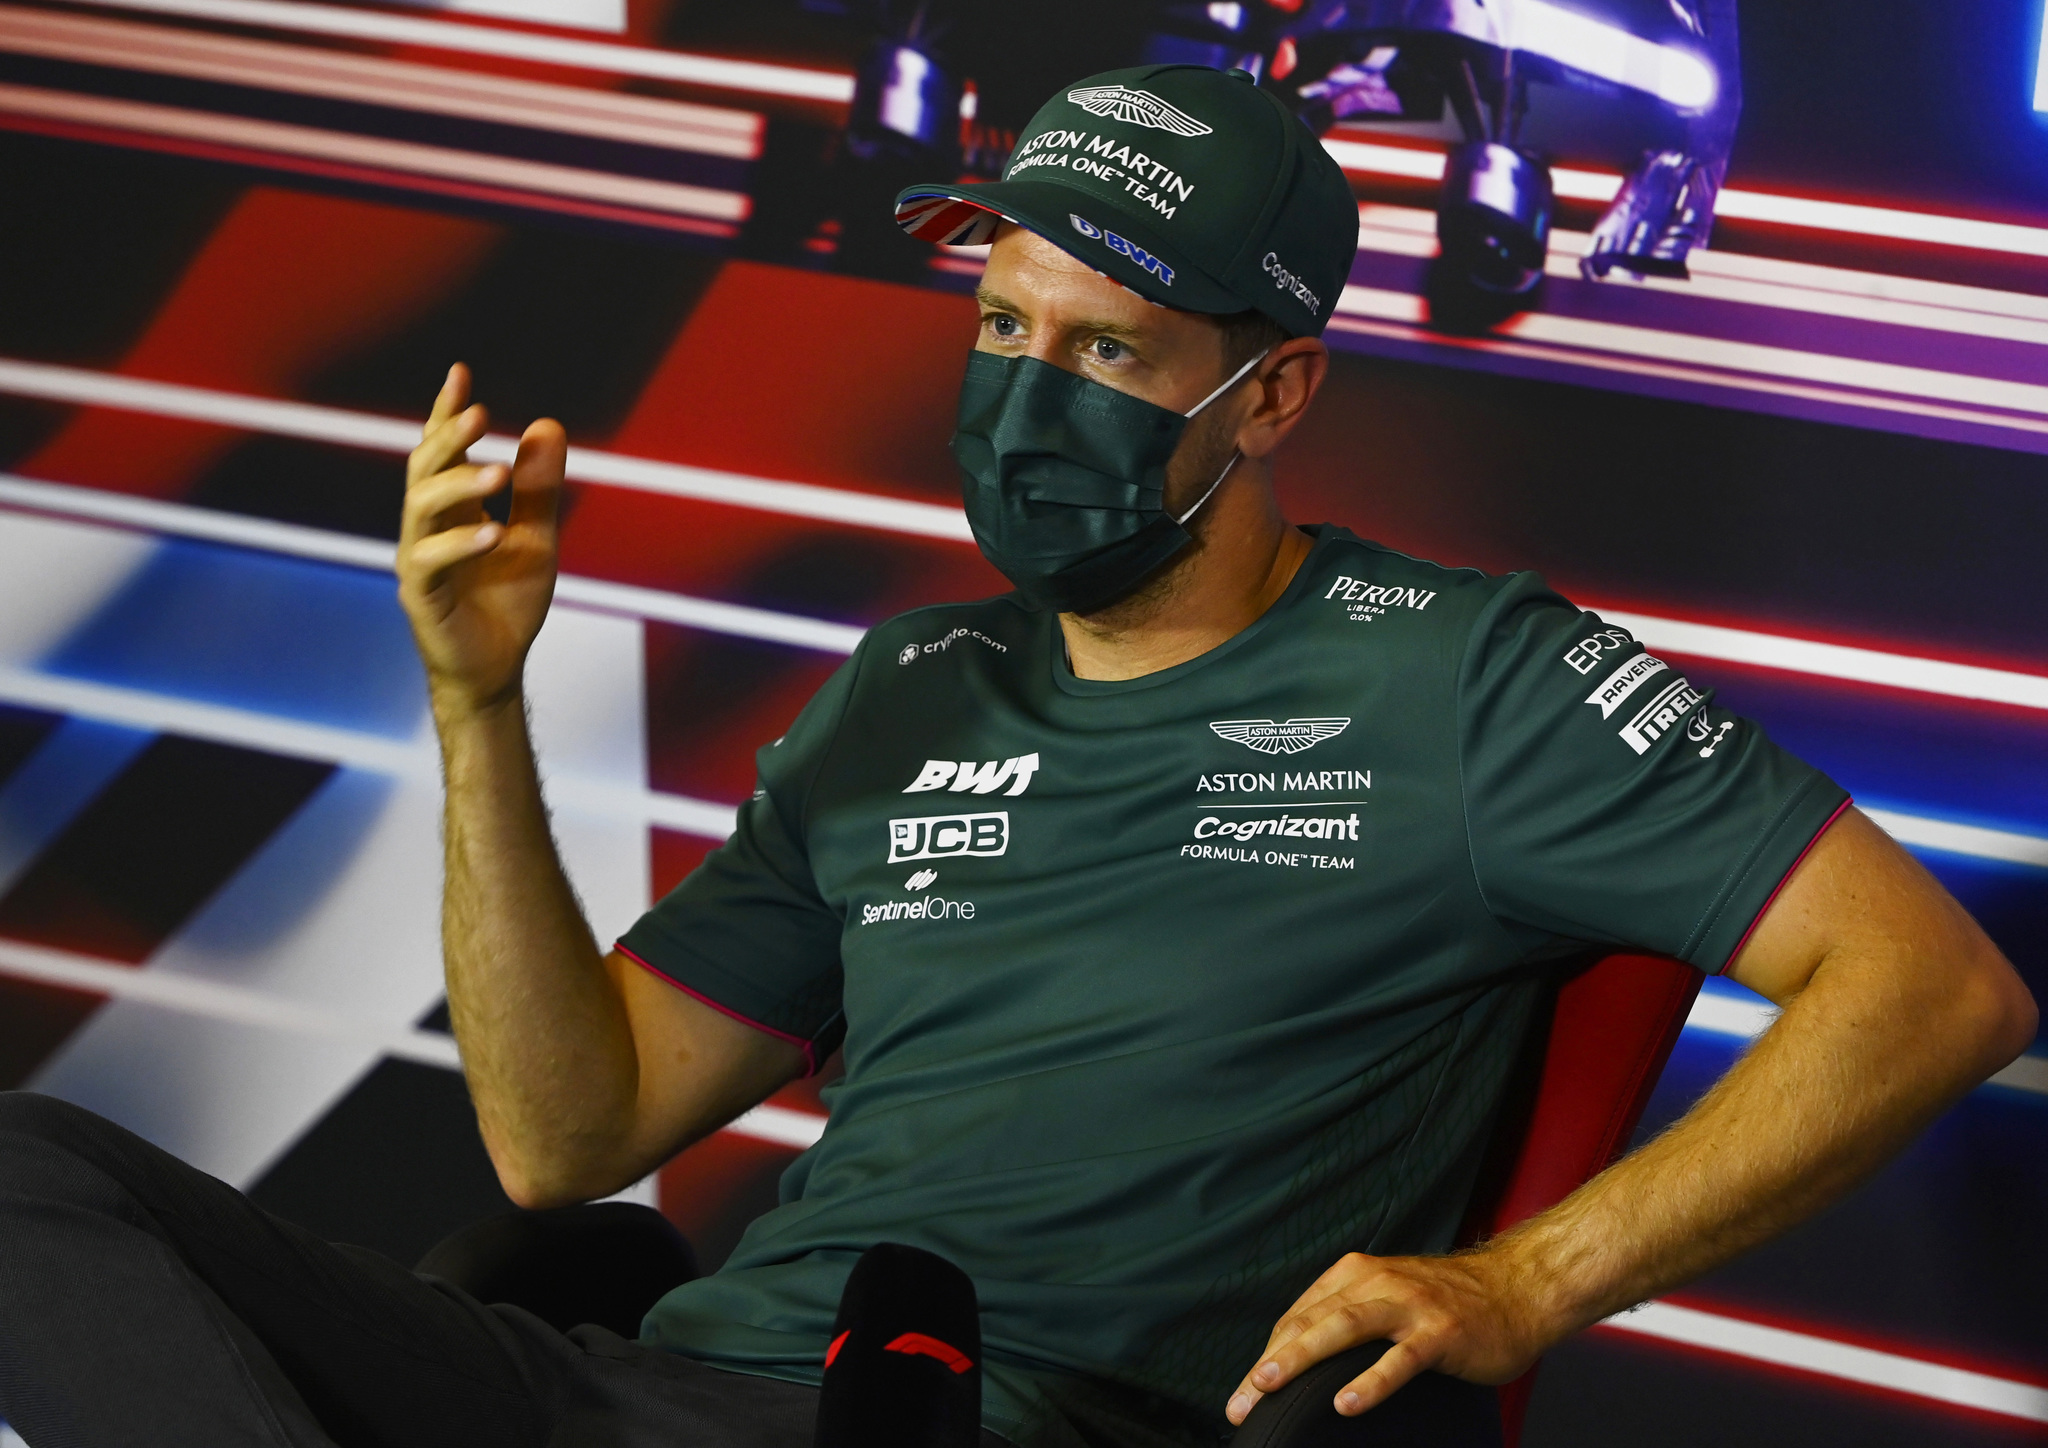 Aston Martin driver Sebastian lt;HIT gt;Vettel lt;/HIT gt; of Germany speaks during a media conference at the Silverstone circuit, Silverstone, England, Thursday, July 15, 2021. The British Formula One Grand Prix will be held on Sunday. (Mark Sutton, Pool Photo via AP)